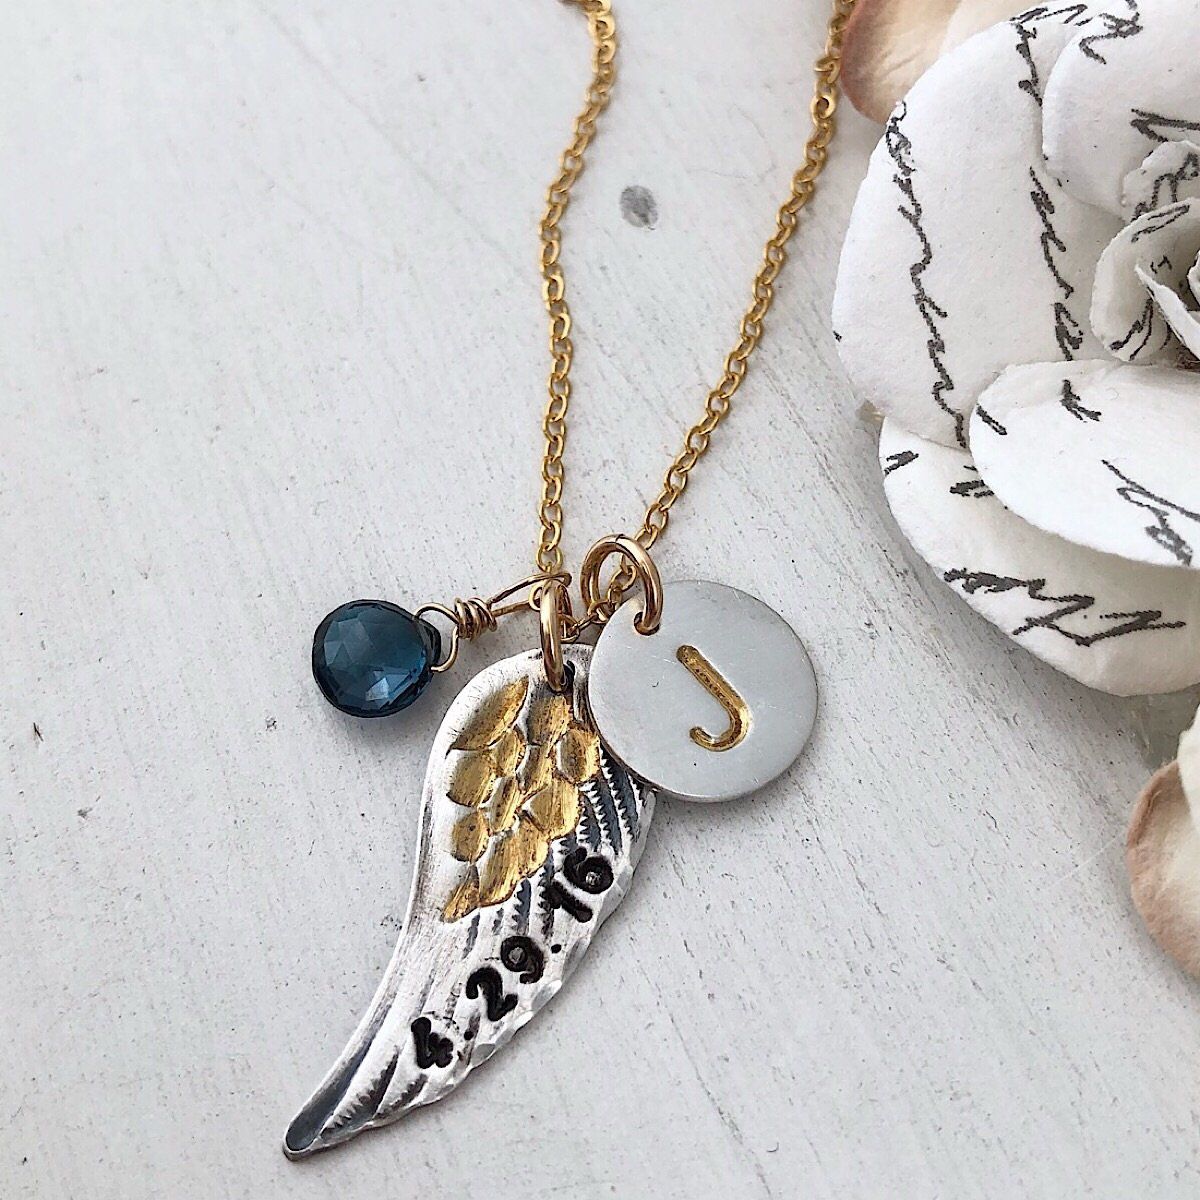 Evermore Necklace - IsabelleGraceJewelry